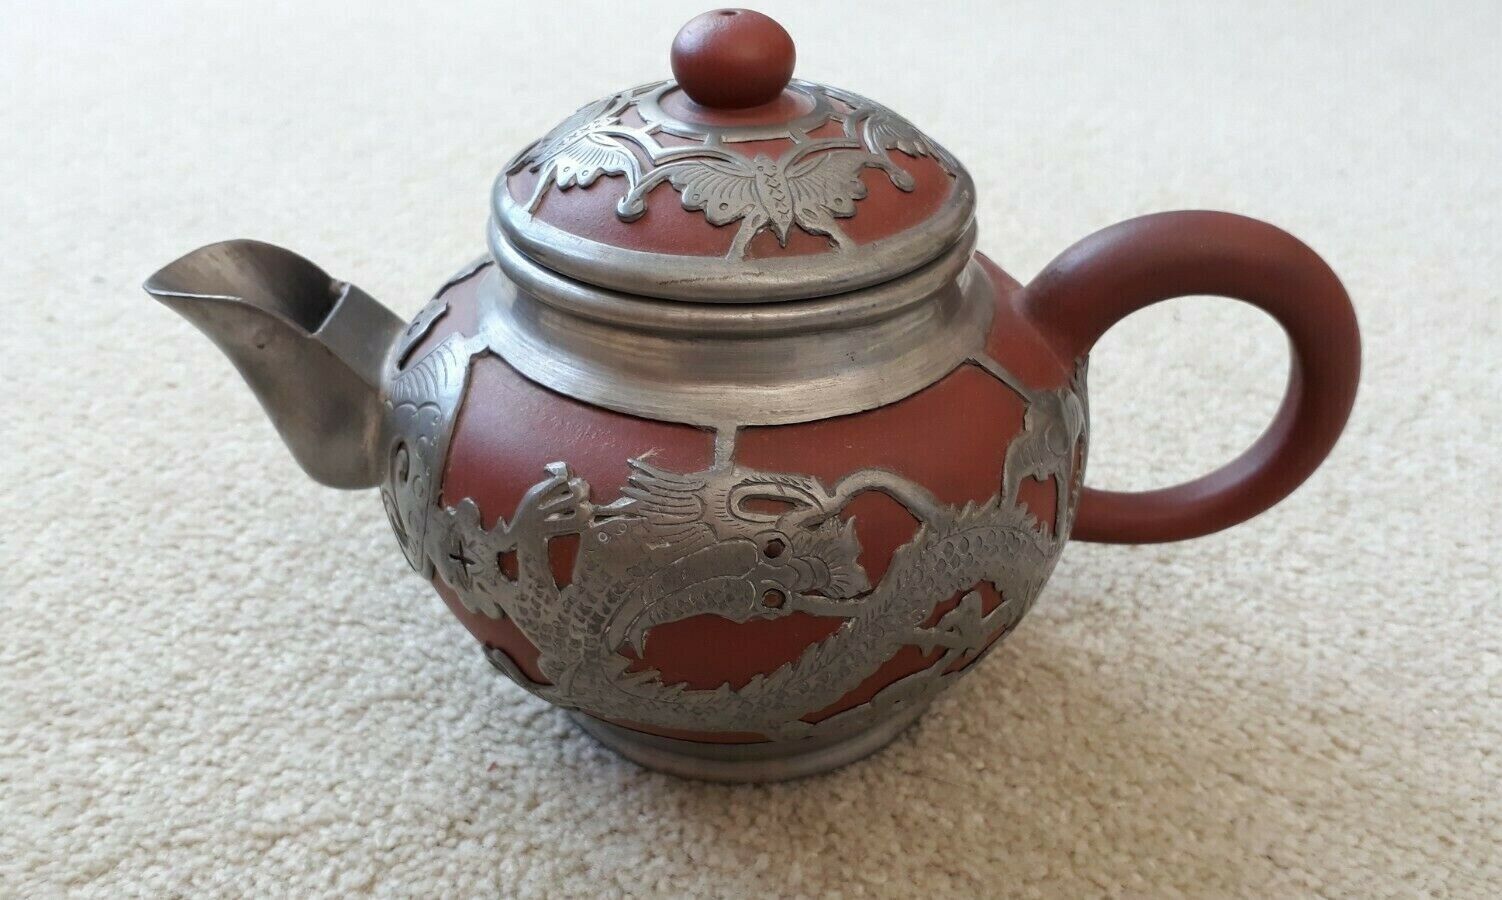 Antique Valuations: Chefoo Teapot Terracotta and Pewter Chinese